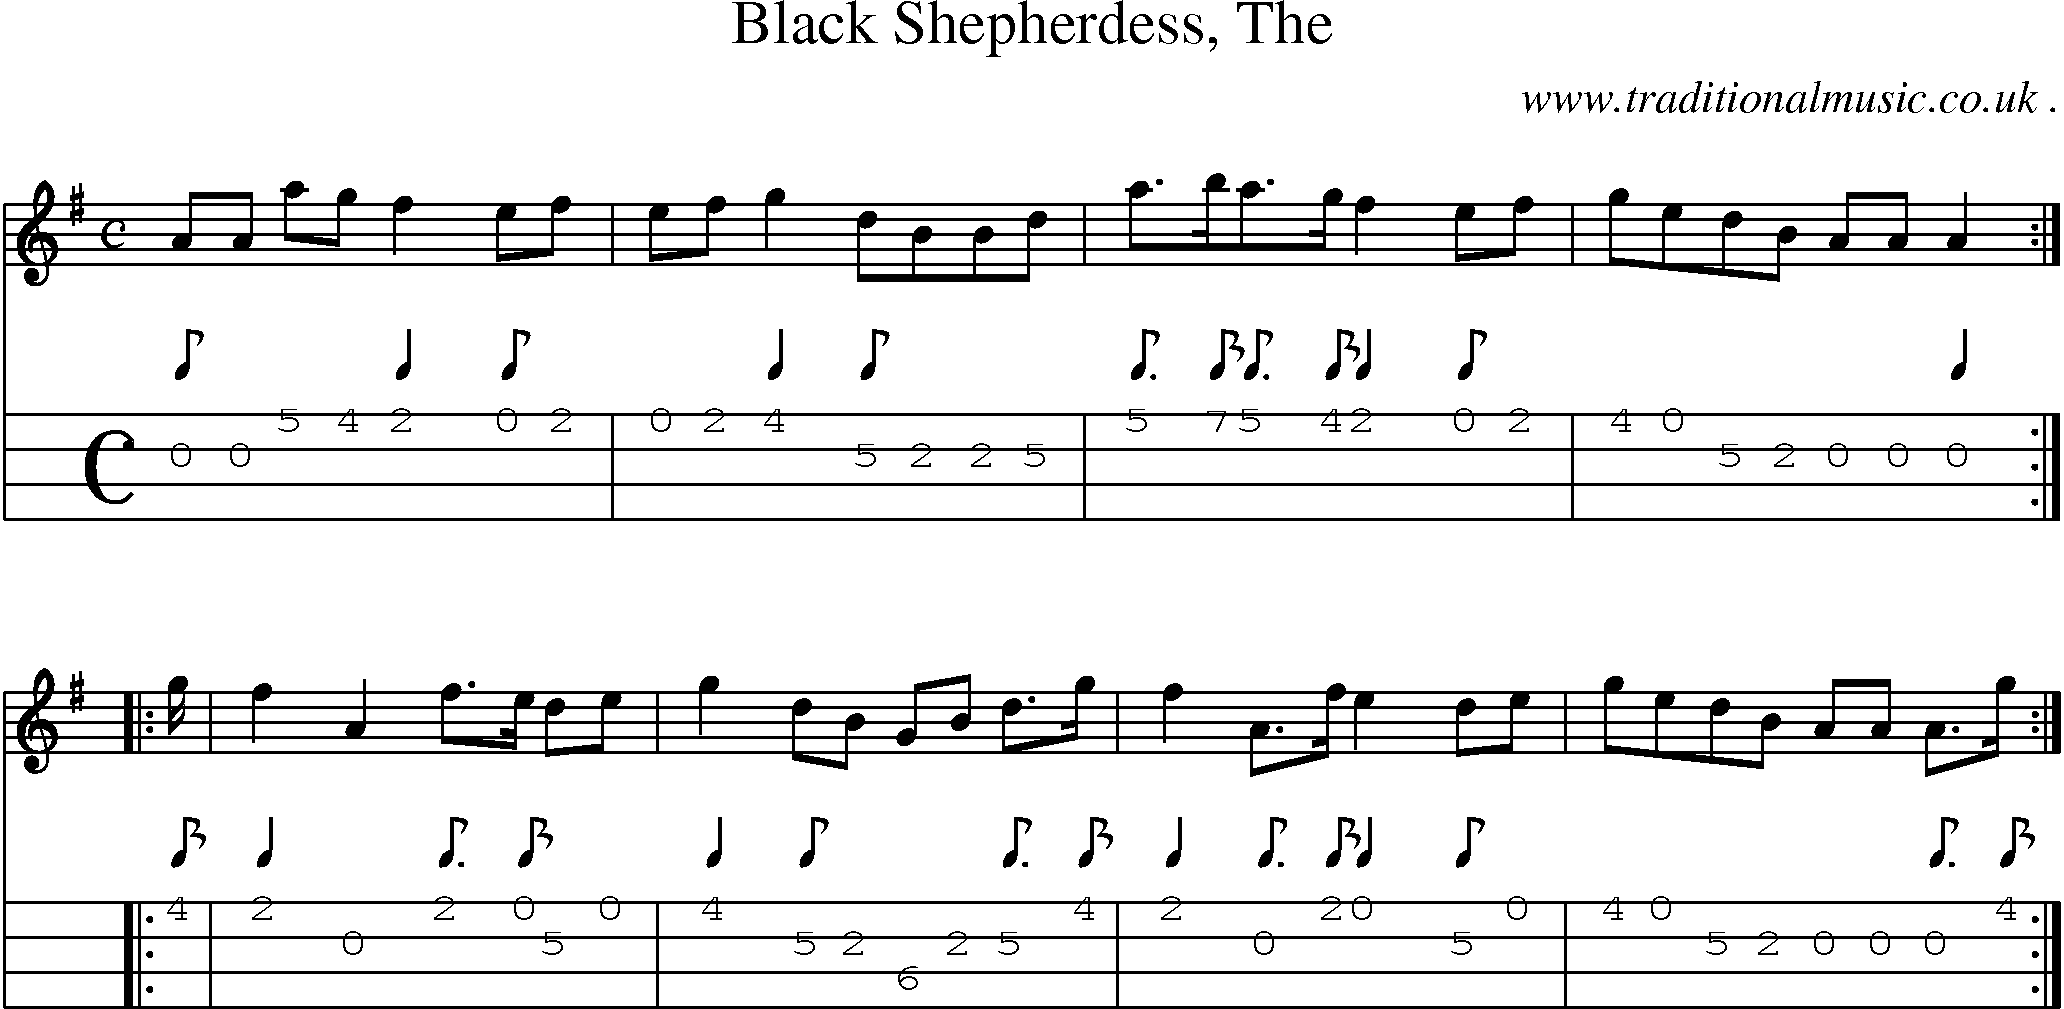 Sheet-music  score, Chords and Mandolin Tabs for Black Shepherdess The